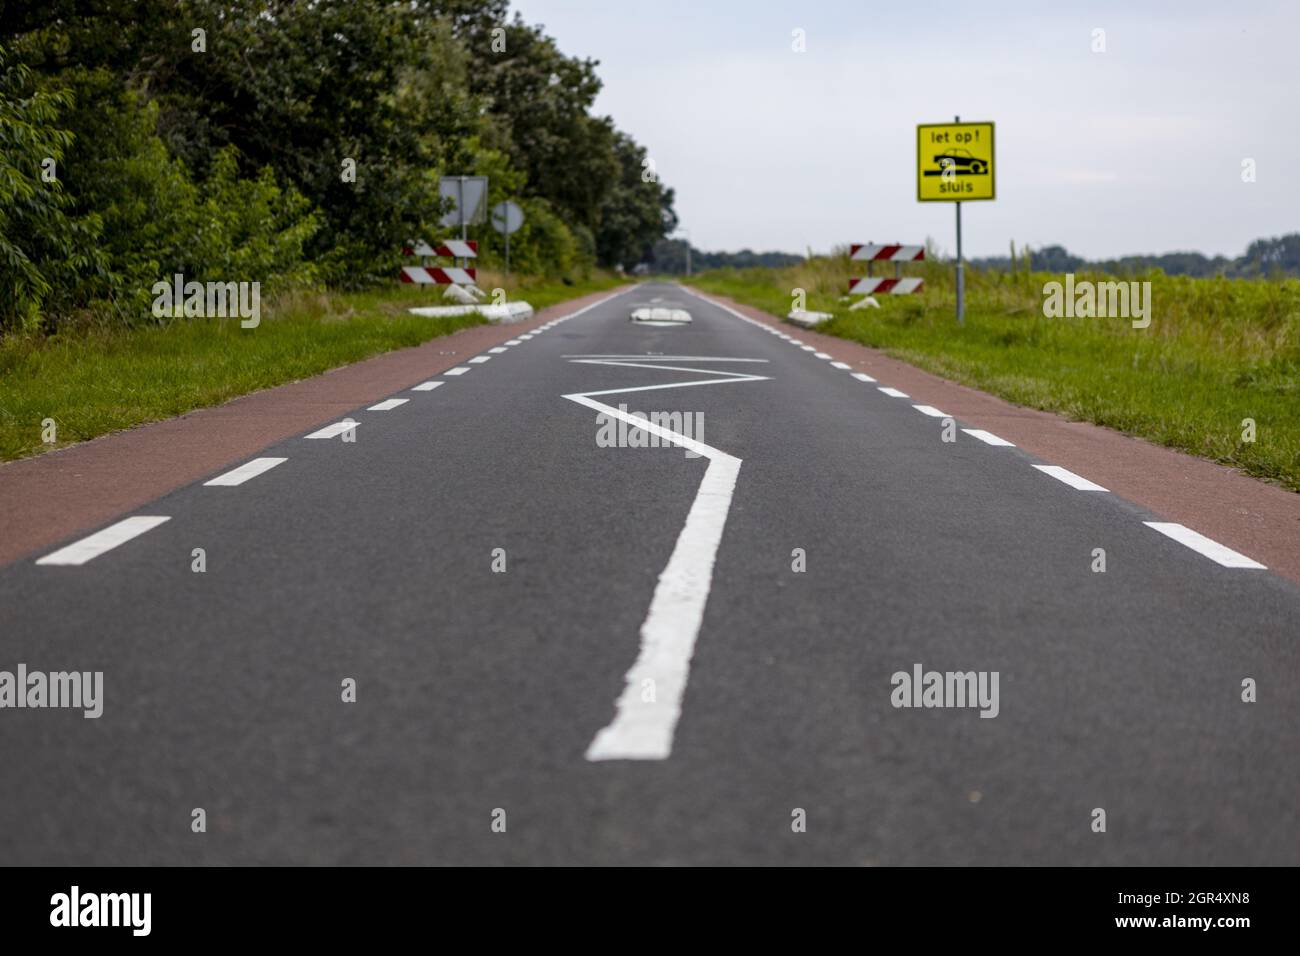 Road lines depicting slow down end of pathway Stock Photo